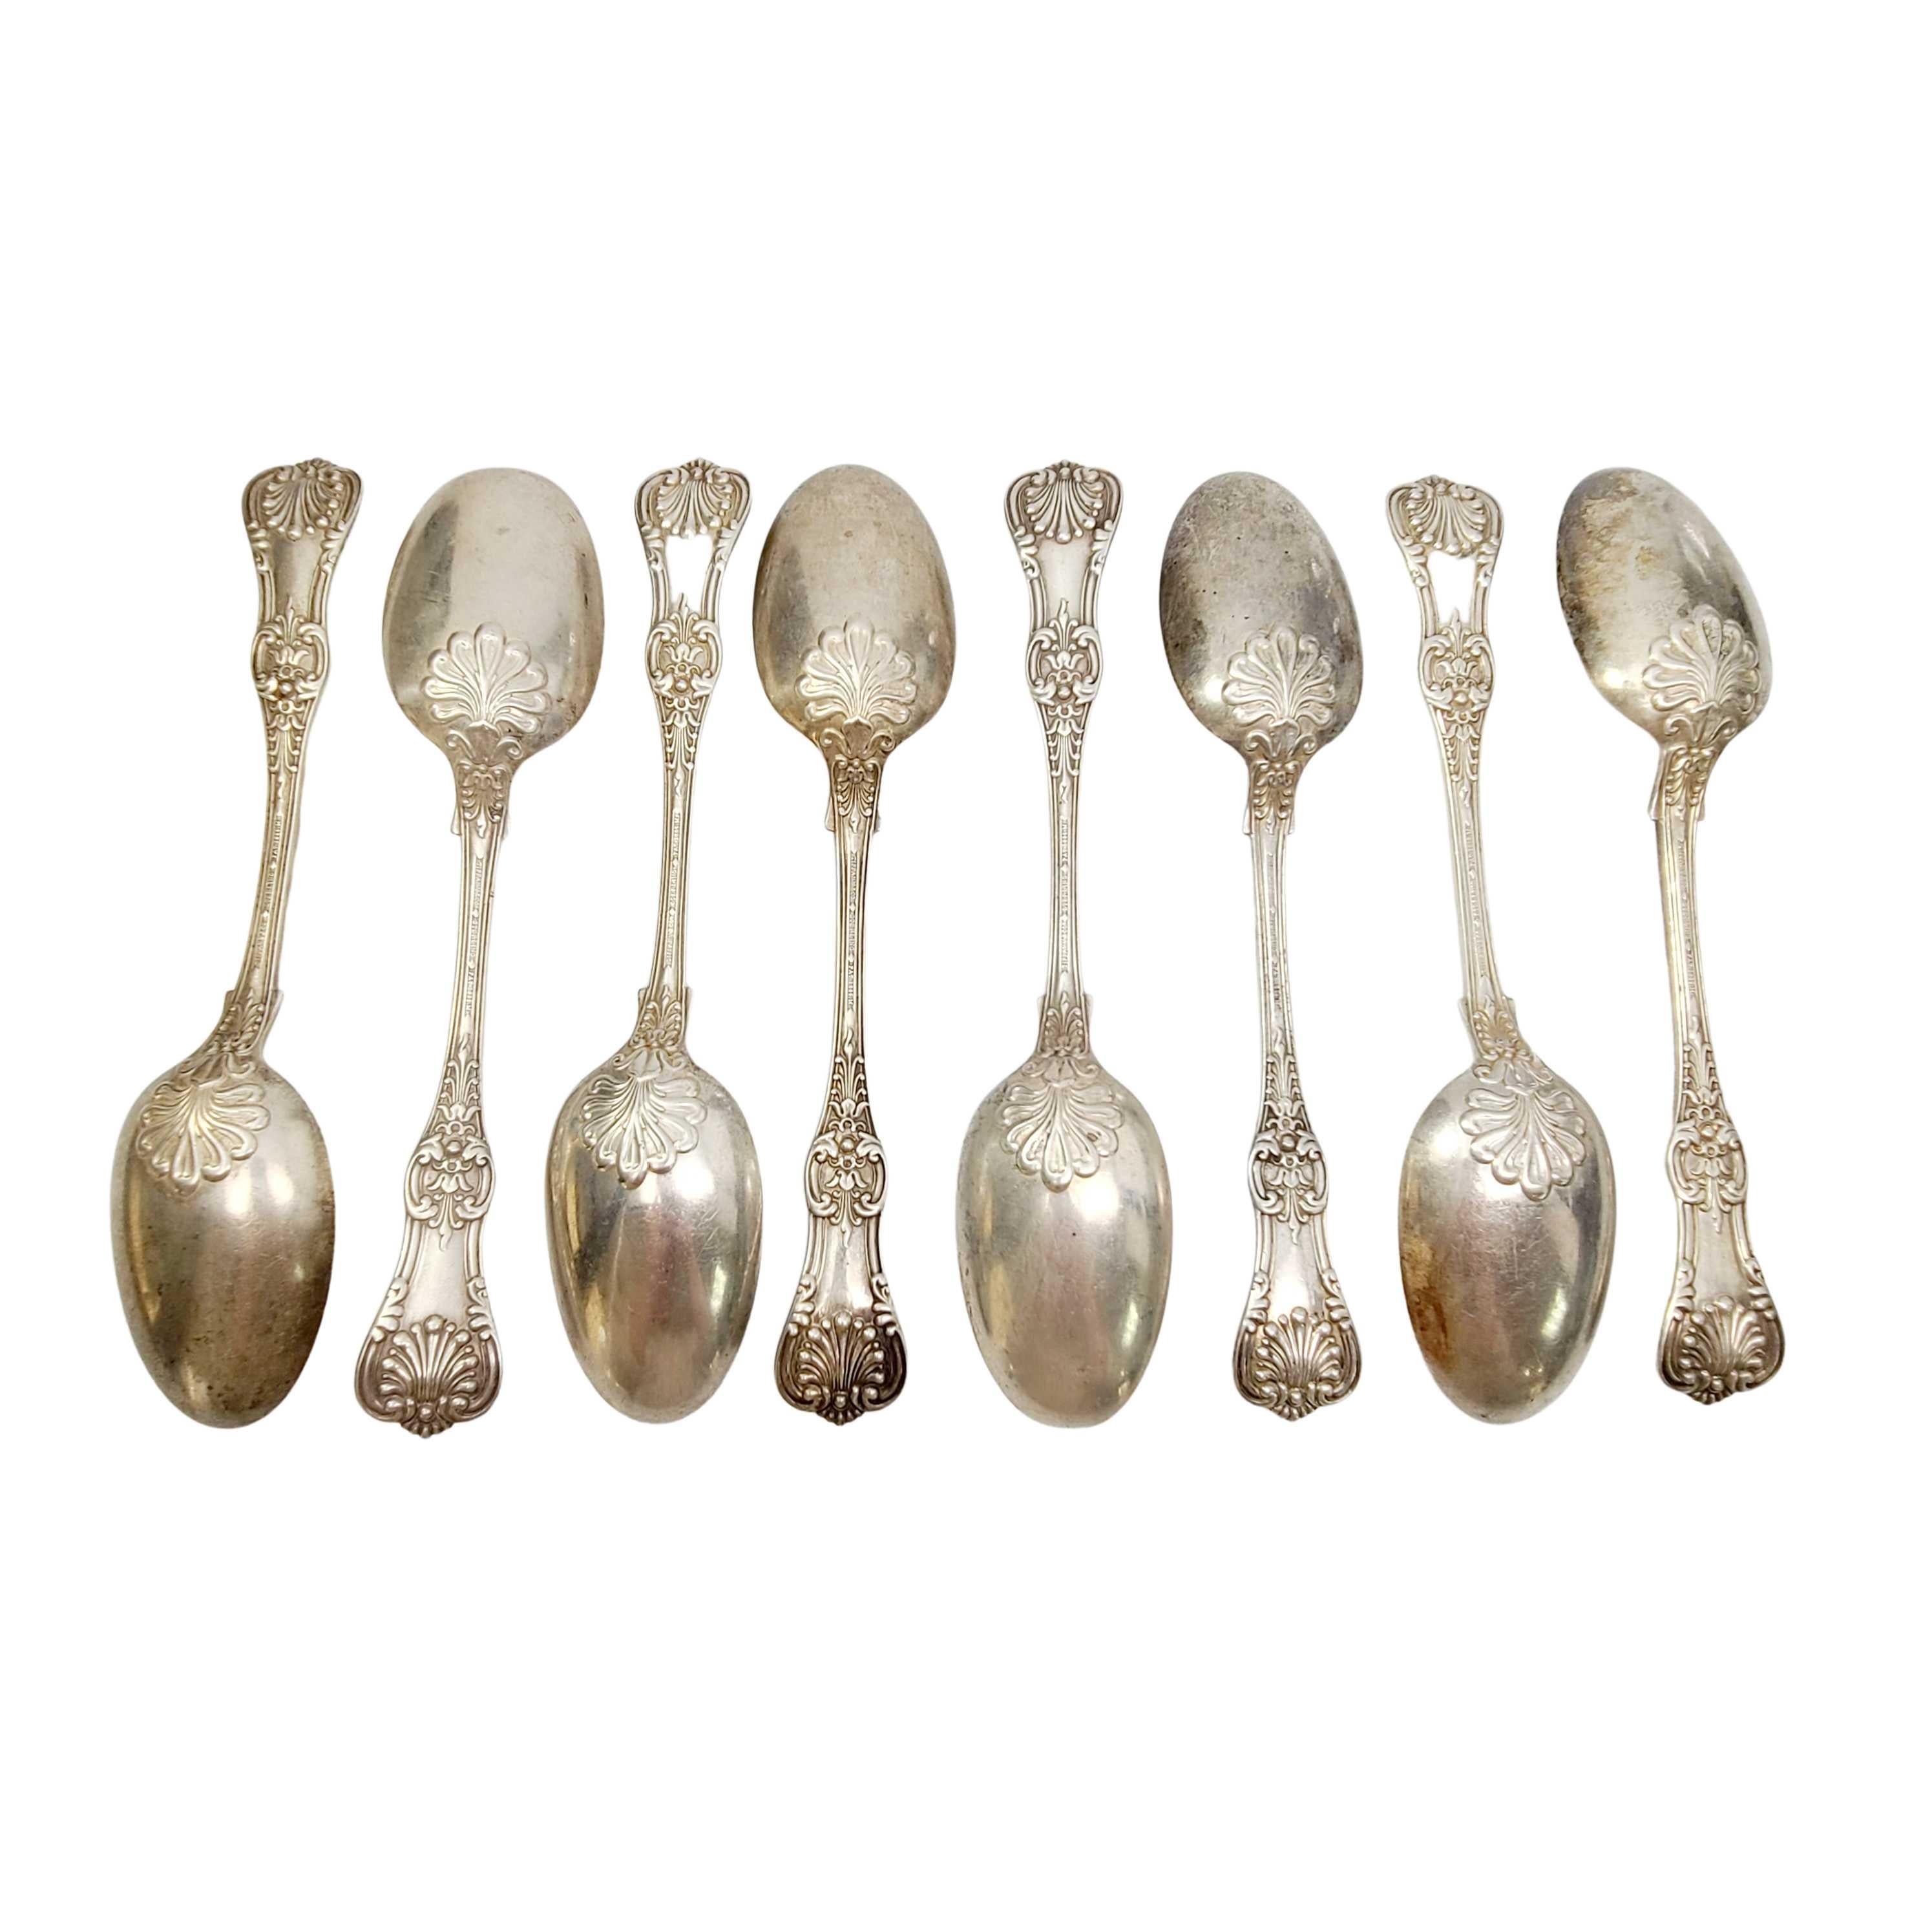 Set of 8 antique sterling silver serving tablespoons by Tiffany & Co in the English King pattern.

No monogram.

Beautiful large spoons in Tiffany's intricate and decorative version of a King pattern which were very popular in the late 19th